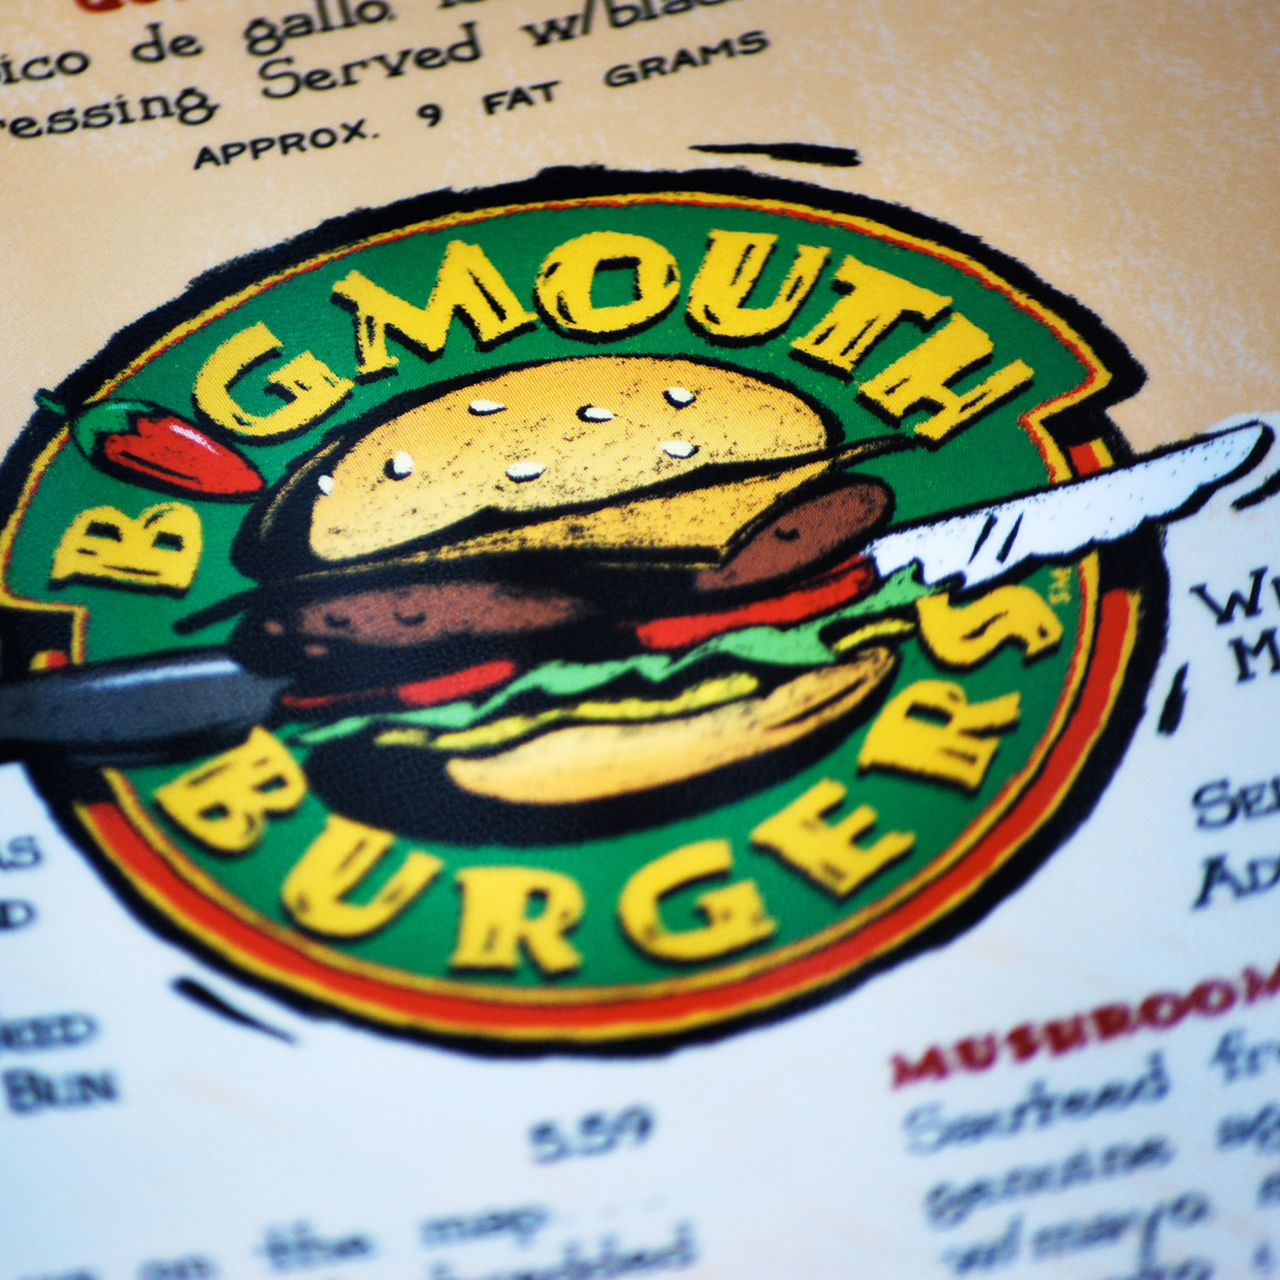 An image of the Big Mouth Burgers logo design on the interior of the Chili's menu